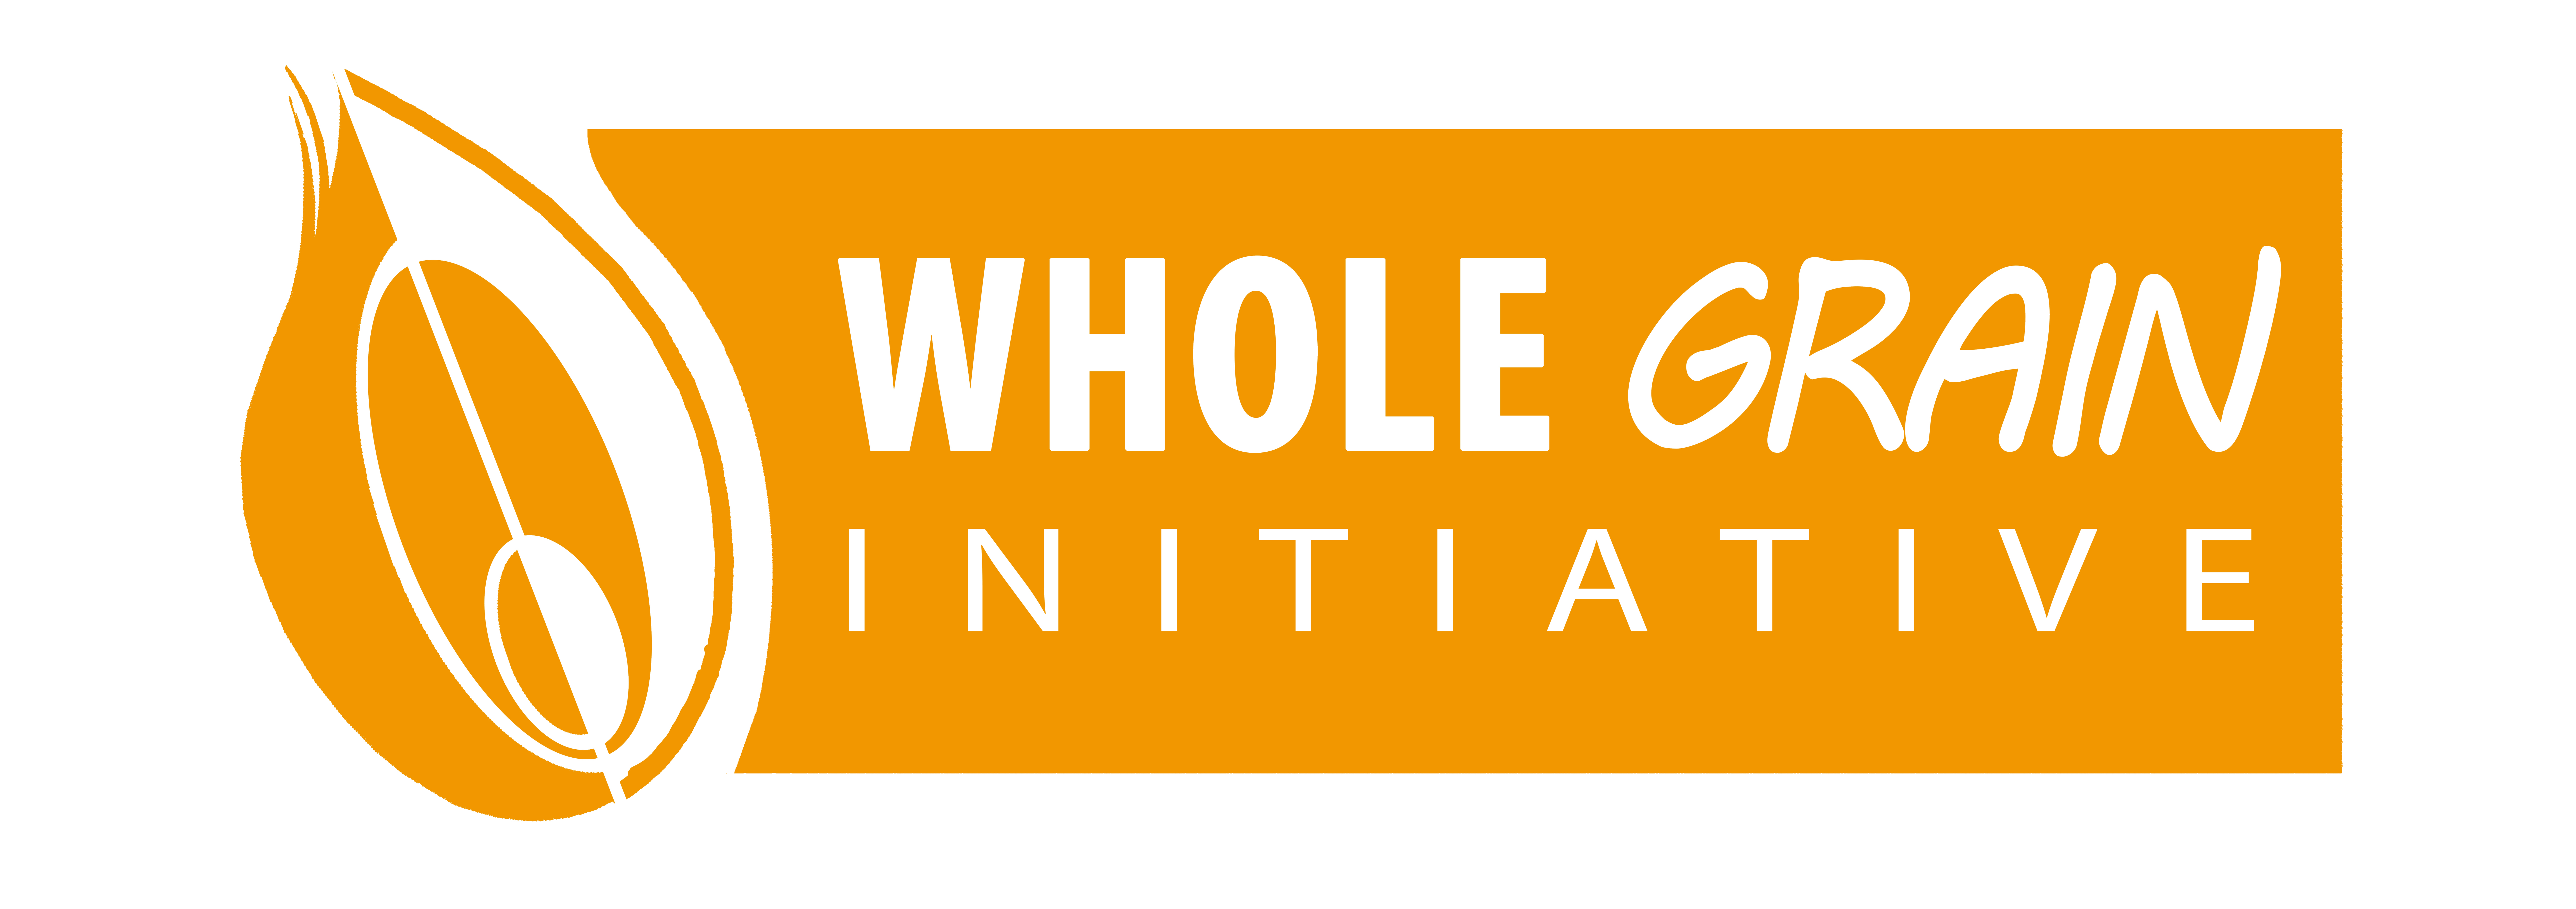 Draft Whole-Grain Food Definition available - join the WGI introduction webinar